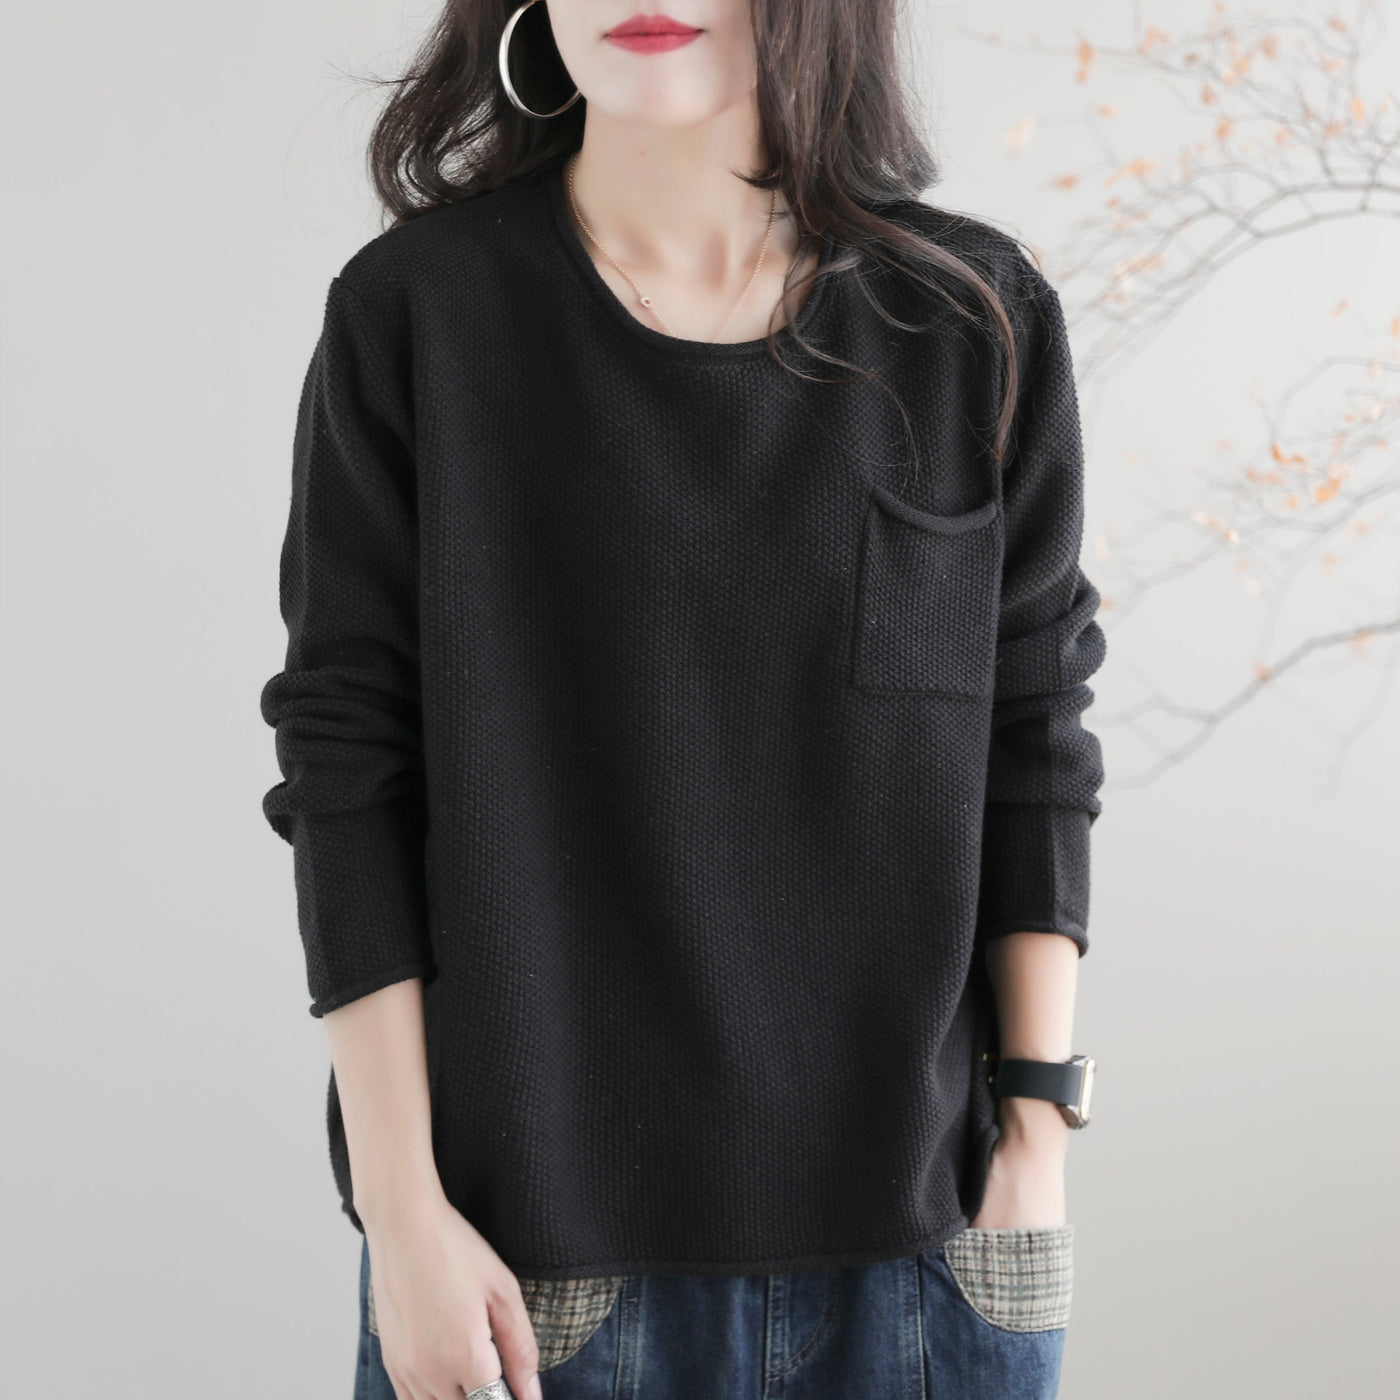 Women Autumn Solid Retro Cotton Knitted Sweater Aug 2022 New Arrival One Size Black 